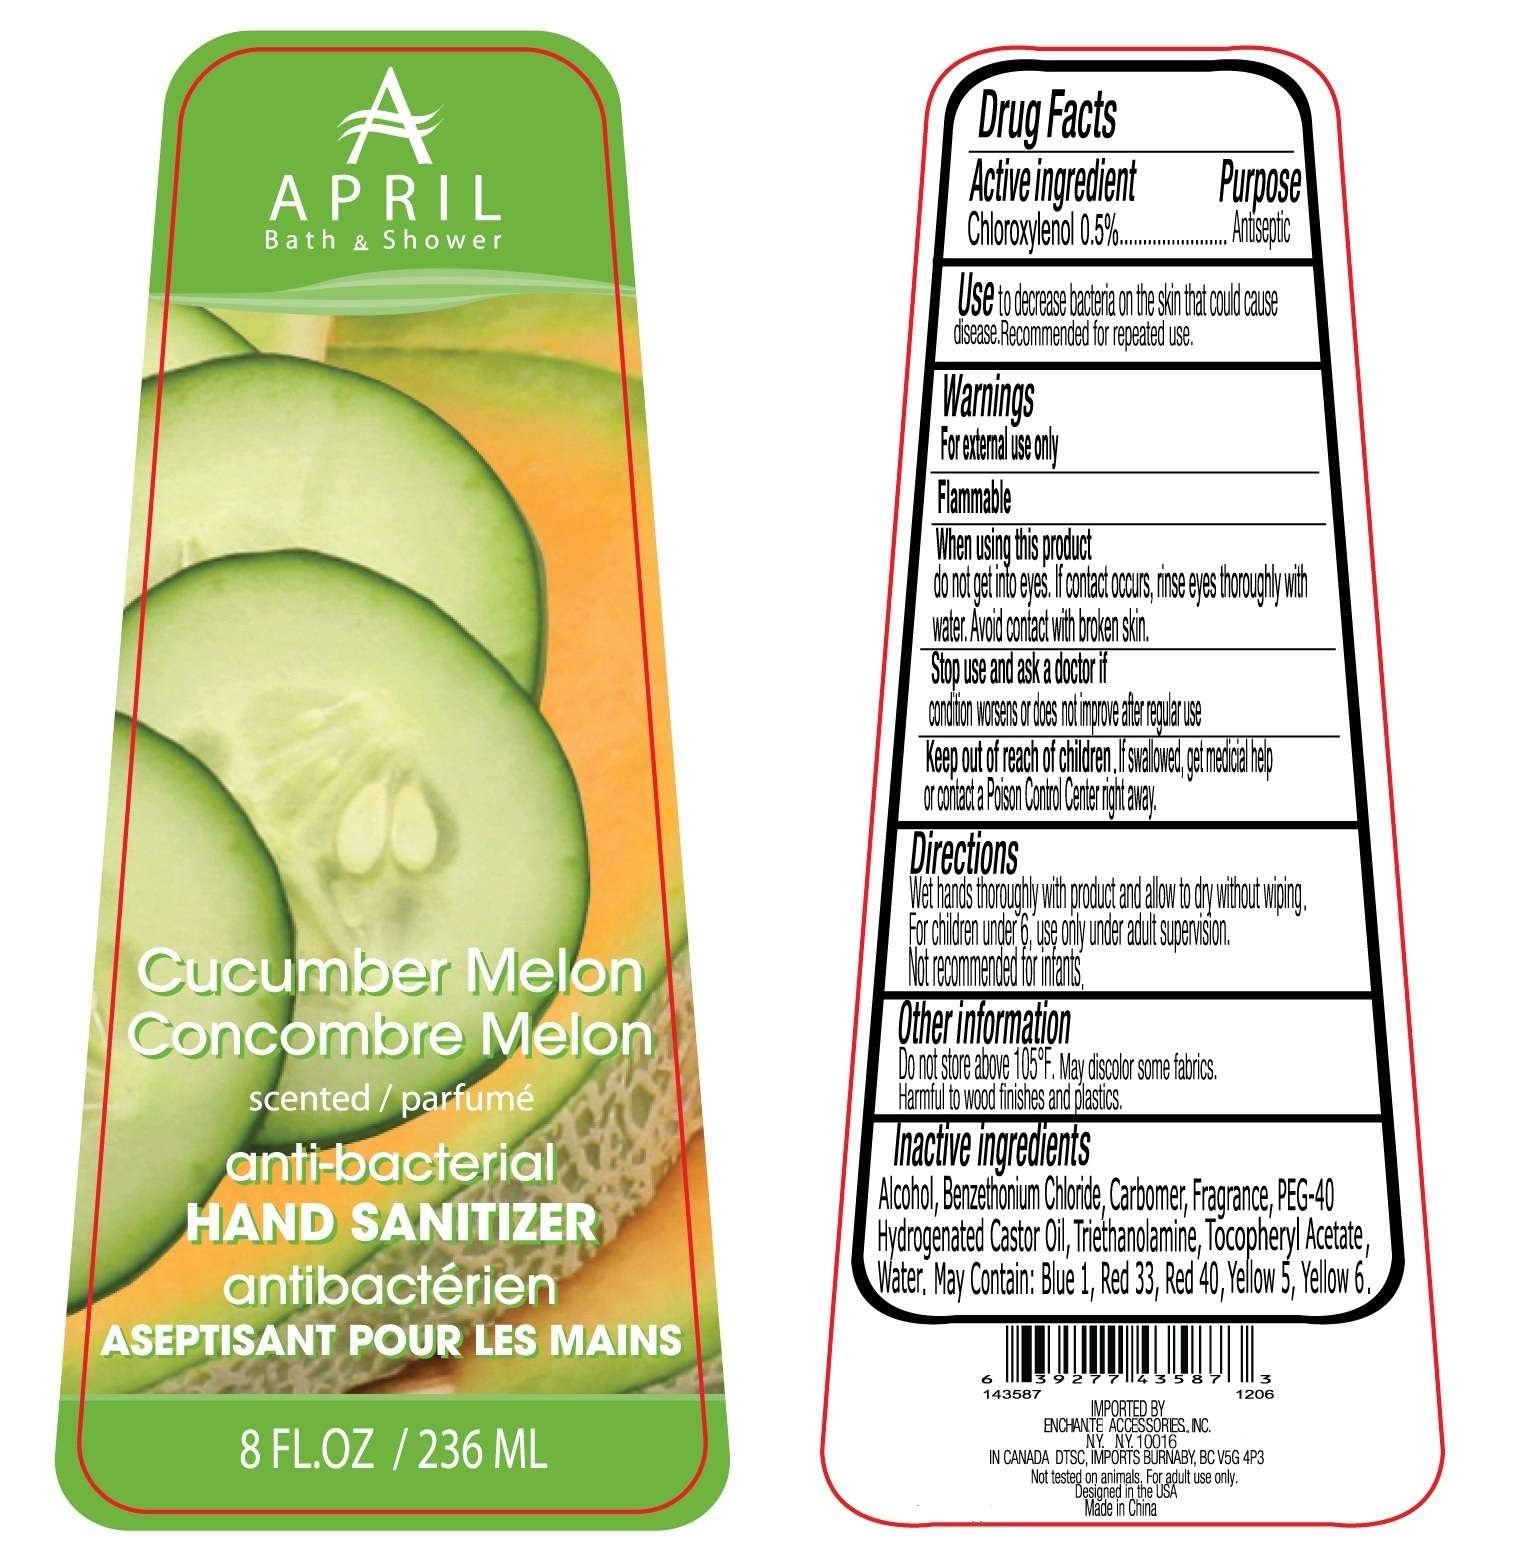 April Bath and Shower Cucumber Melon Scented Hand Sanitizer Anti-Bacterial